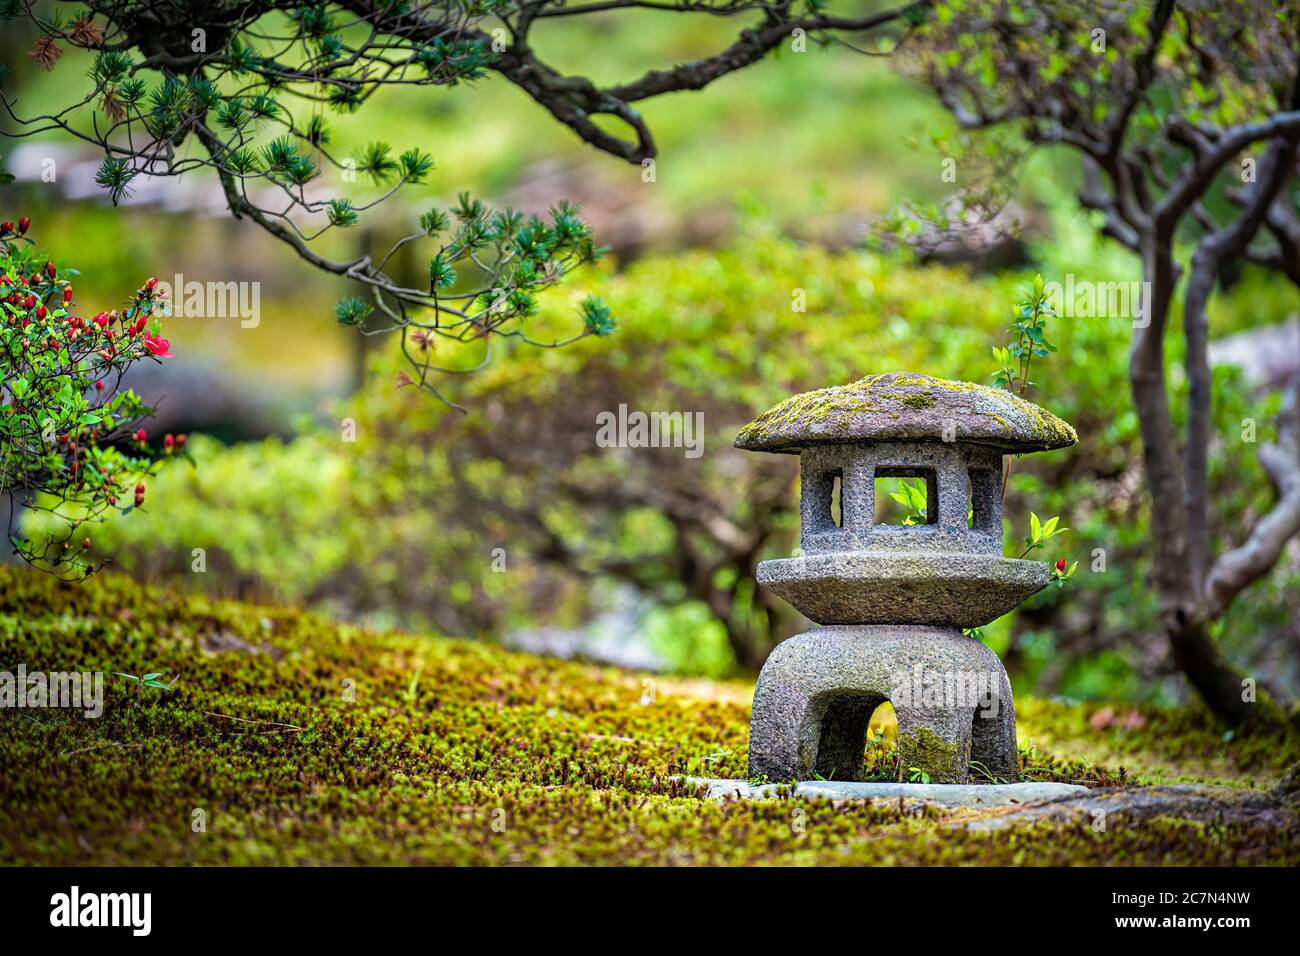 Kyoto, Japan green spring moss garden in Imperial Palace with small stone lantern and bonsai trees of black pine and flowers Stock Photo